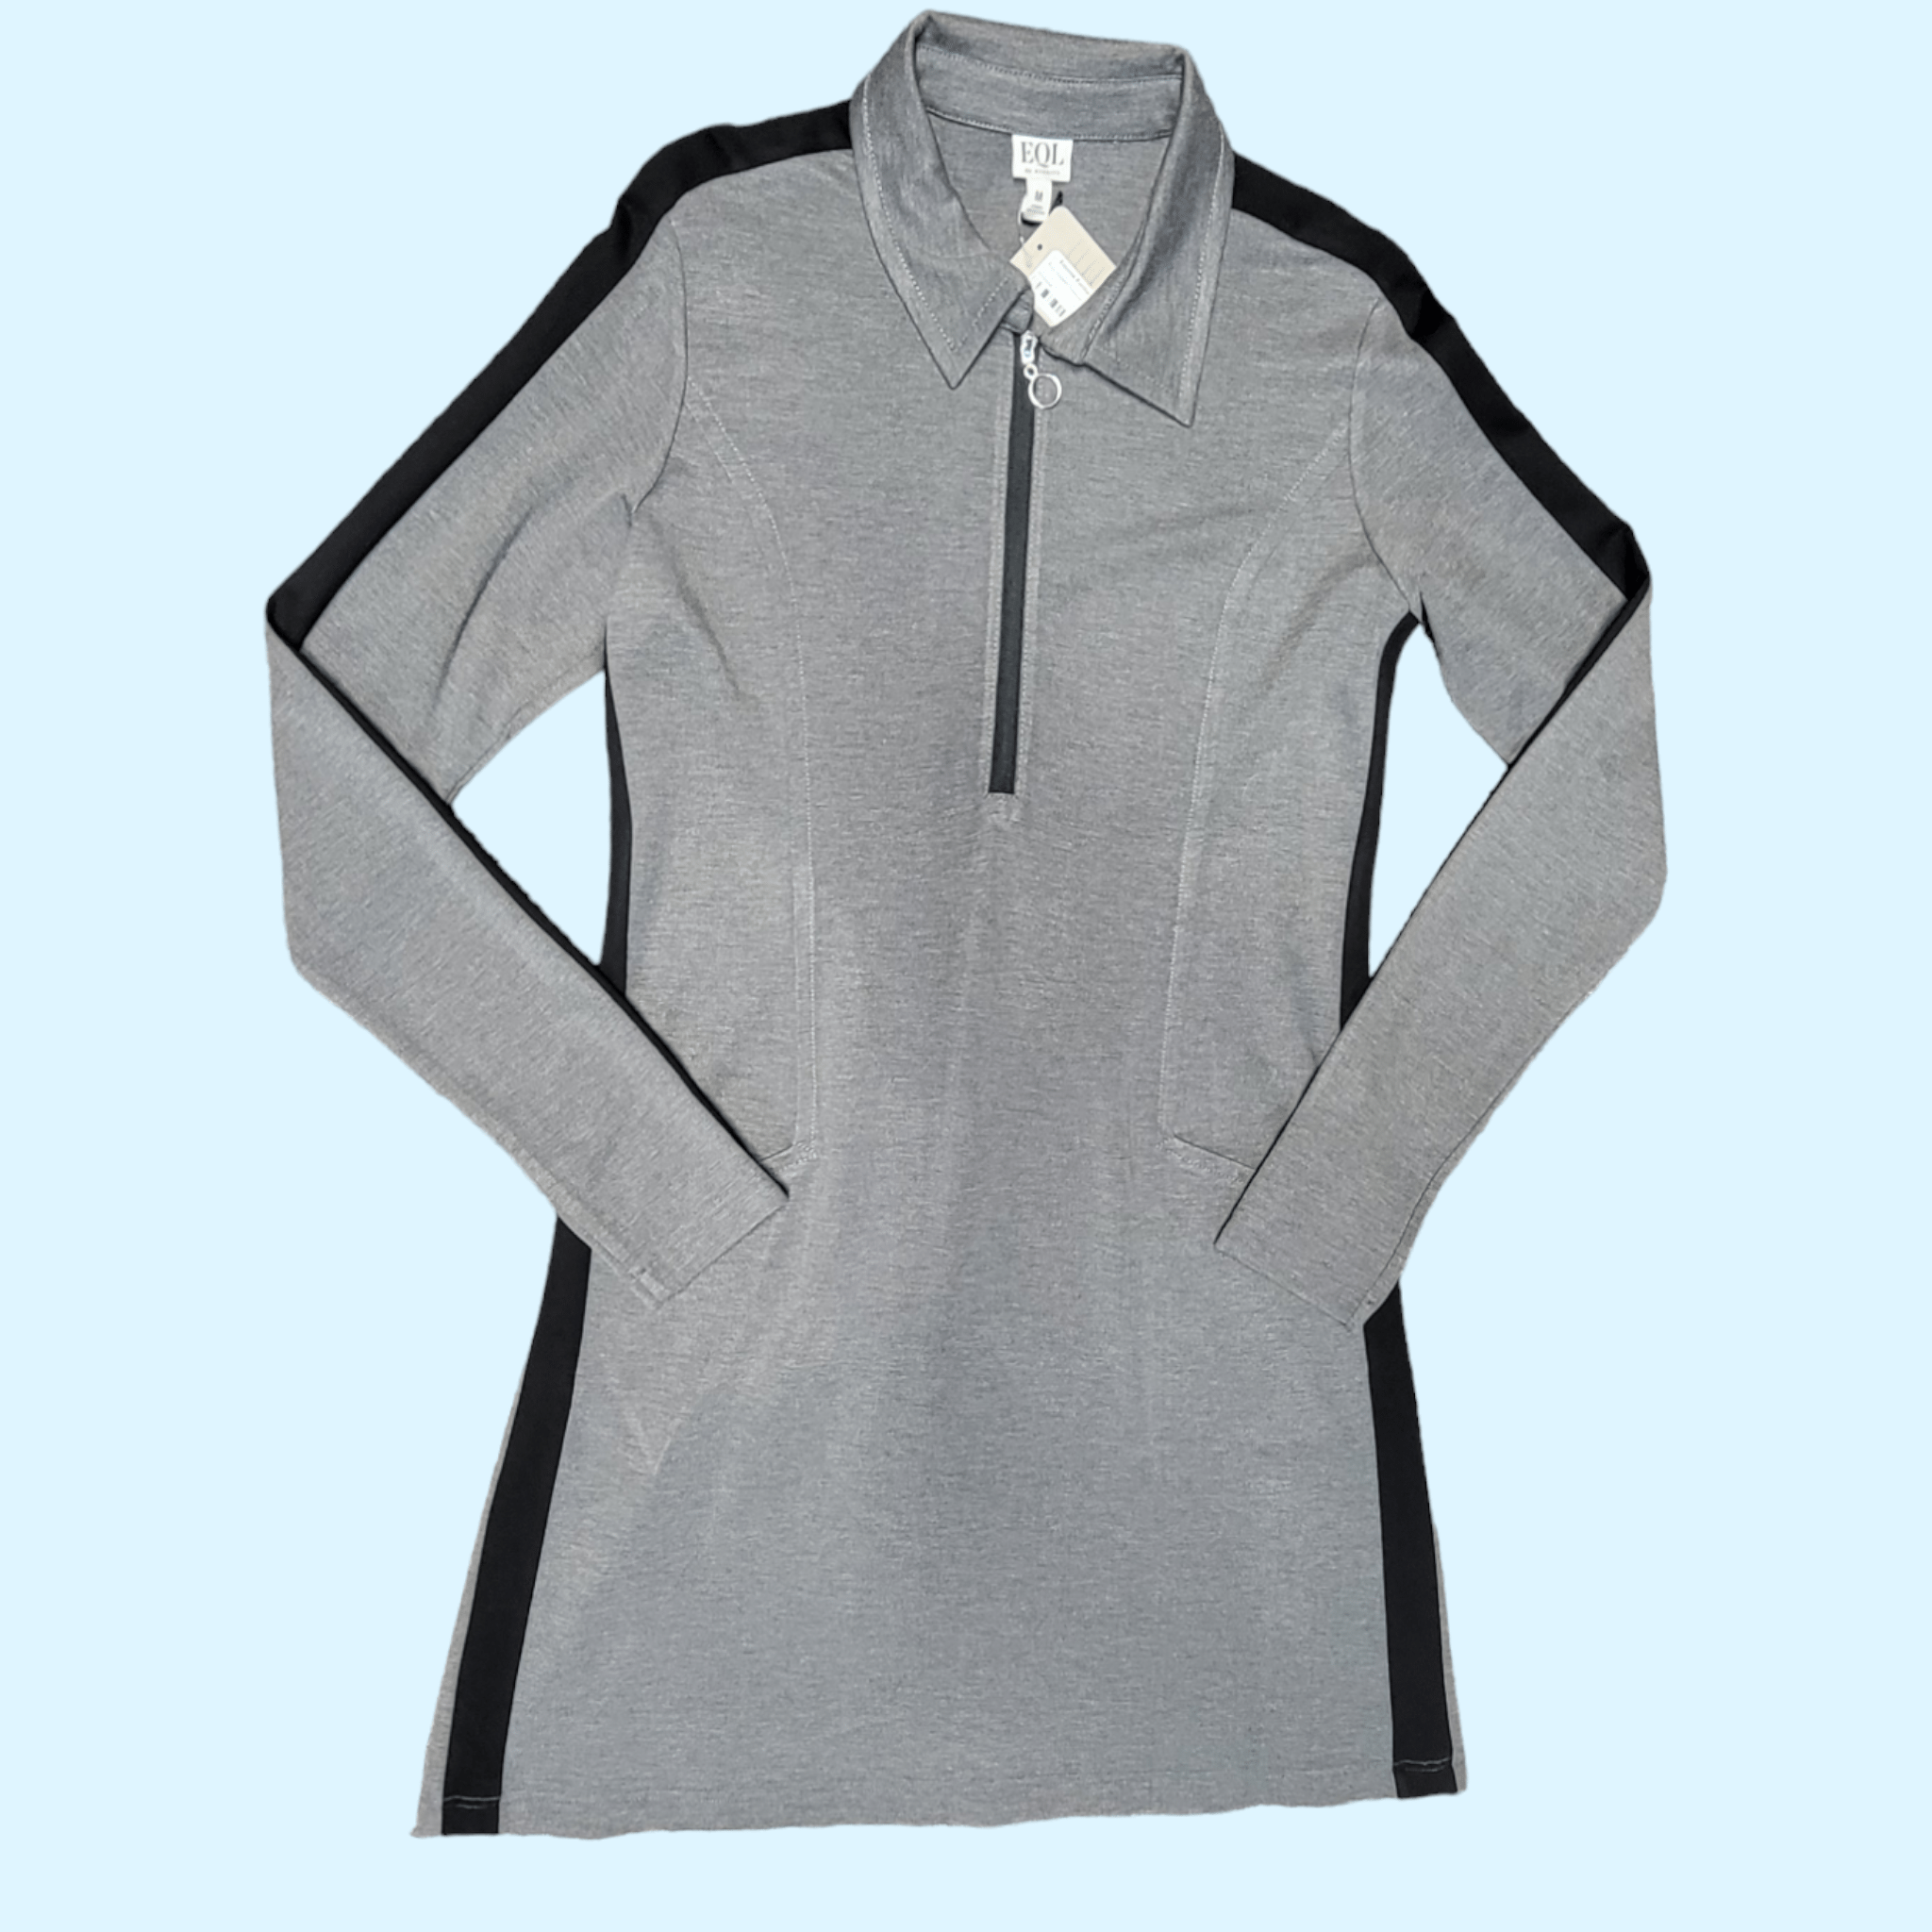 EQL By Kerrits Ascent Ponte Tunic Dress in Charcoal - Medium NWT